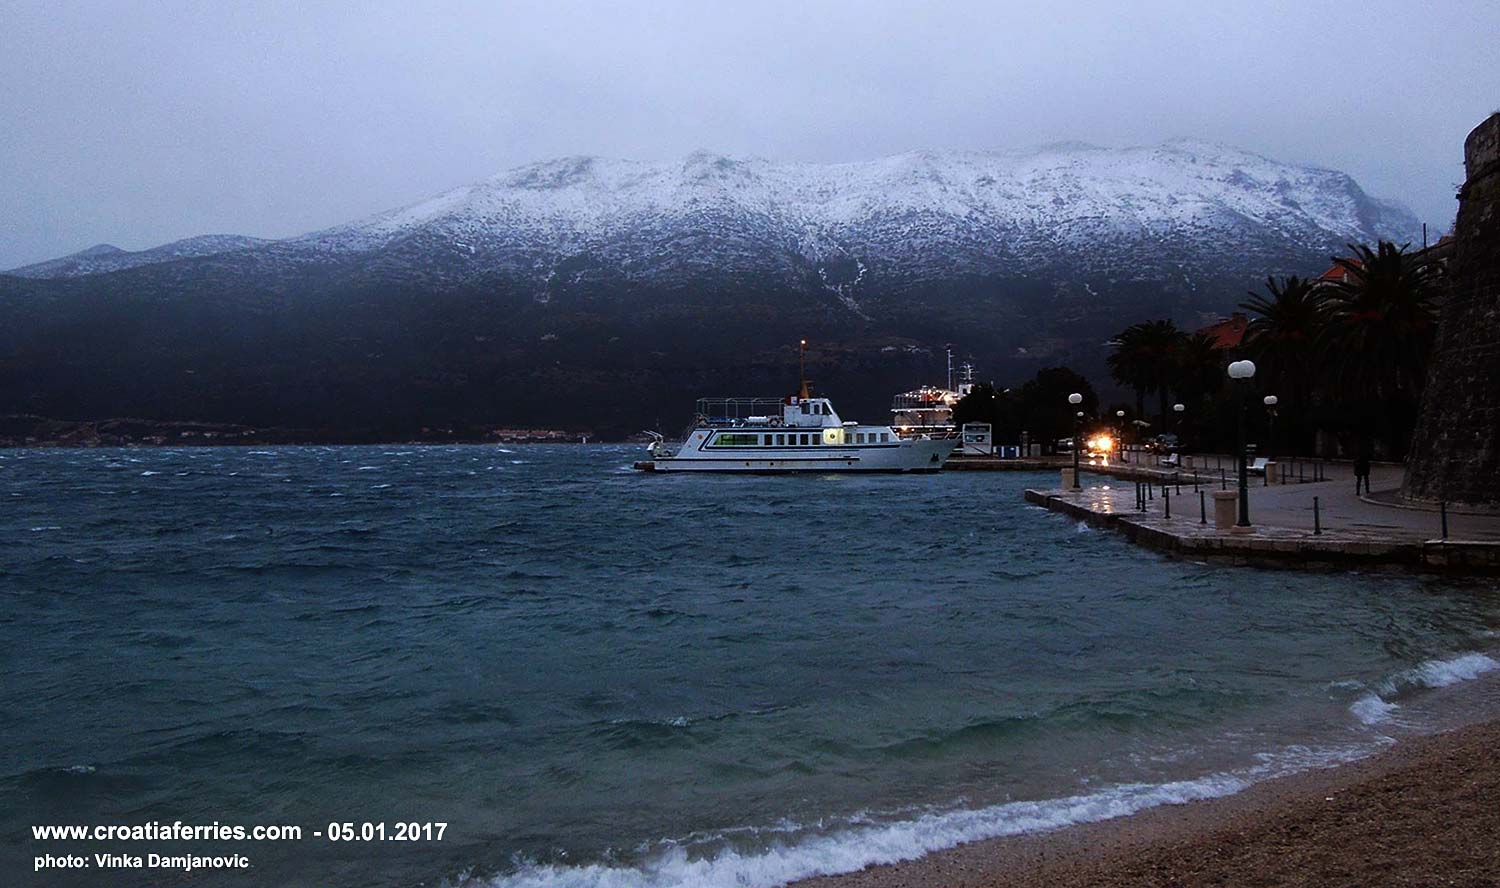 In Adriatic today: A cold front brought snow and high winds around Korcula today; foot passenger ferry Korcula - Orebic this afternoon docking in Korcula port.